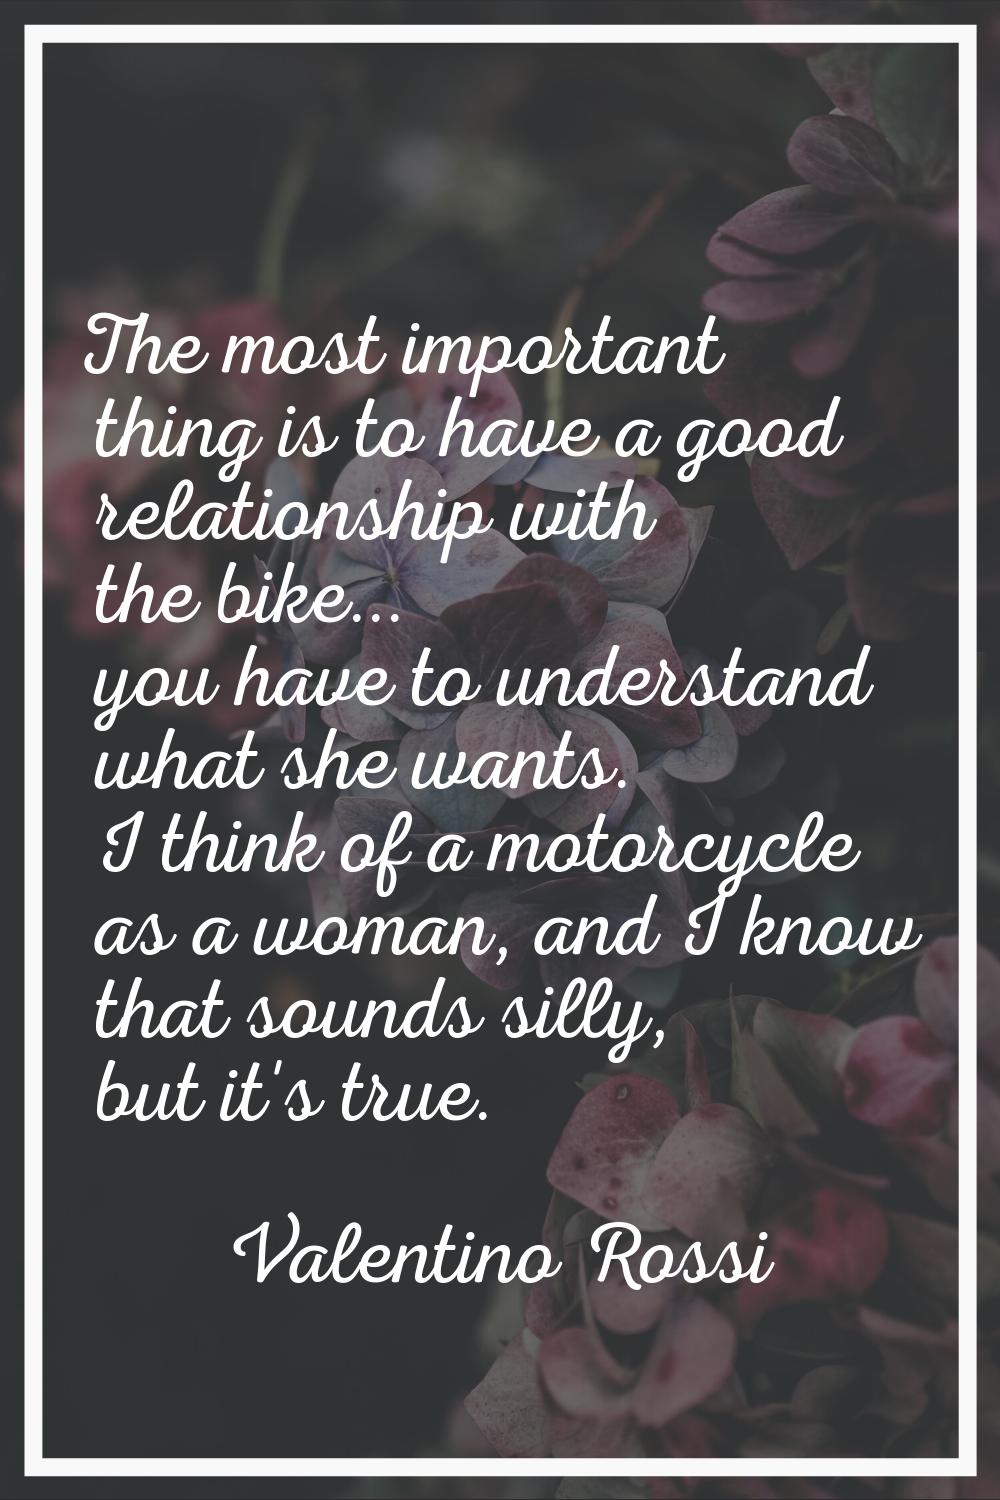 The most important thing is to have a good relationship with the bike... you have to understand wha